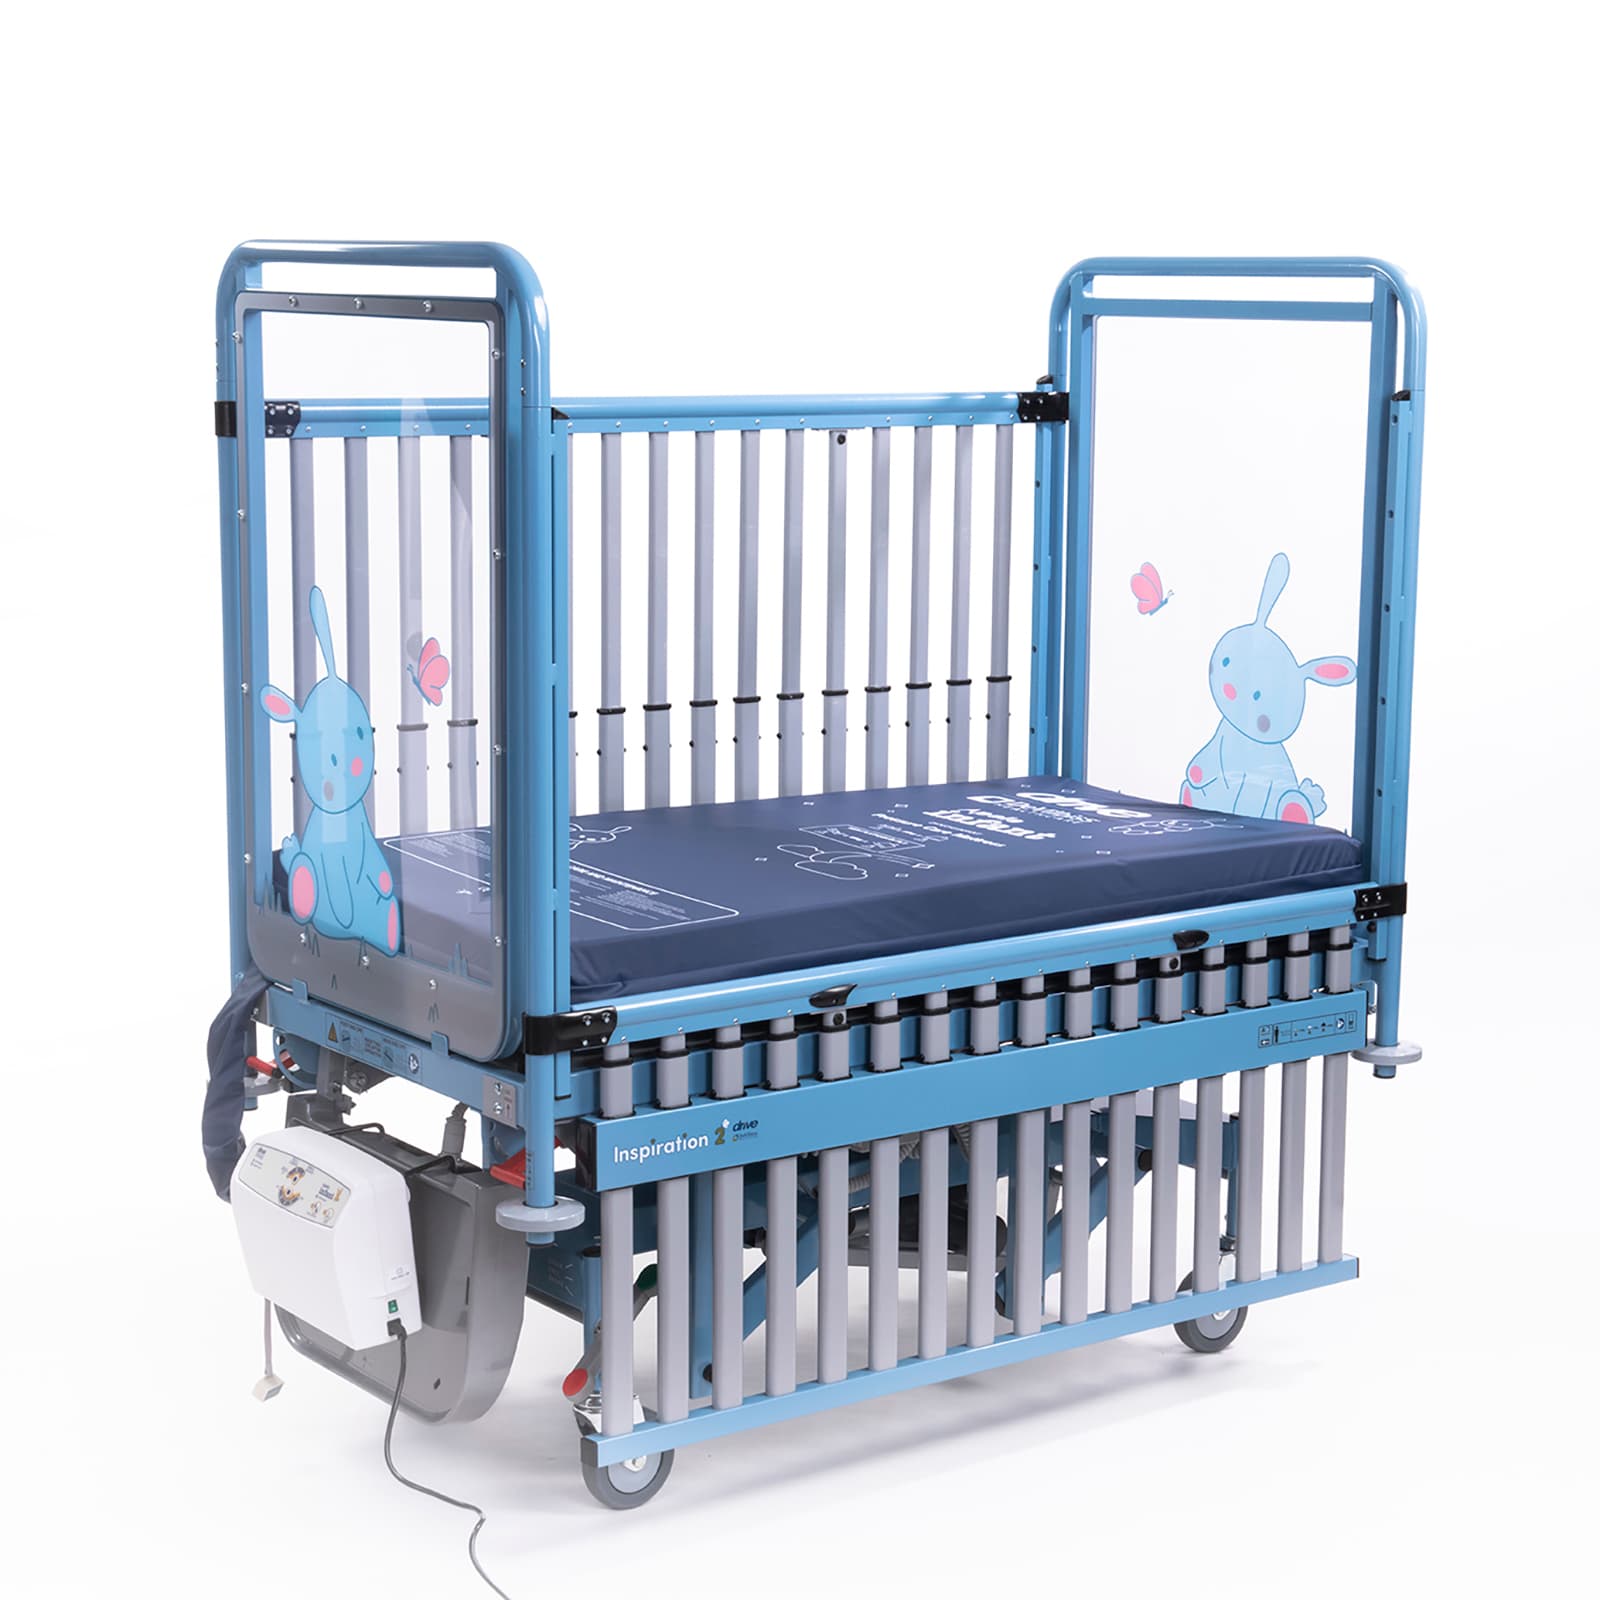 Inspiration 2 Cot and Apollo Infant Dynamic Mattress System